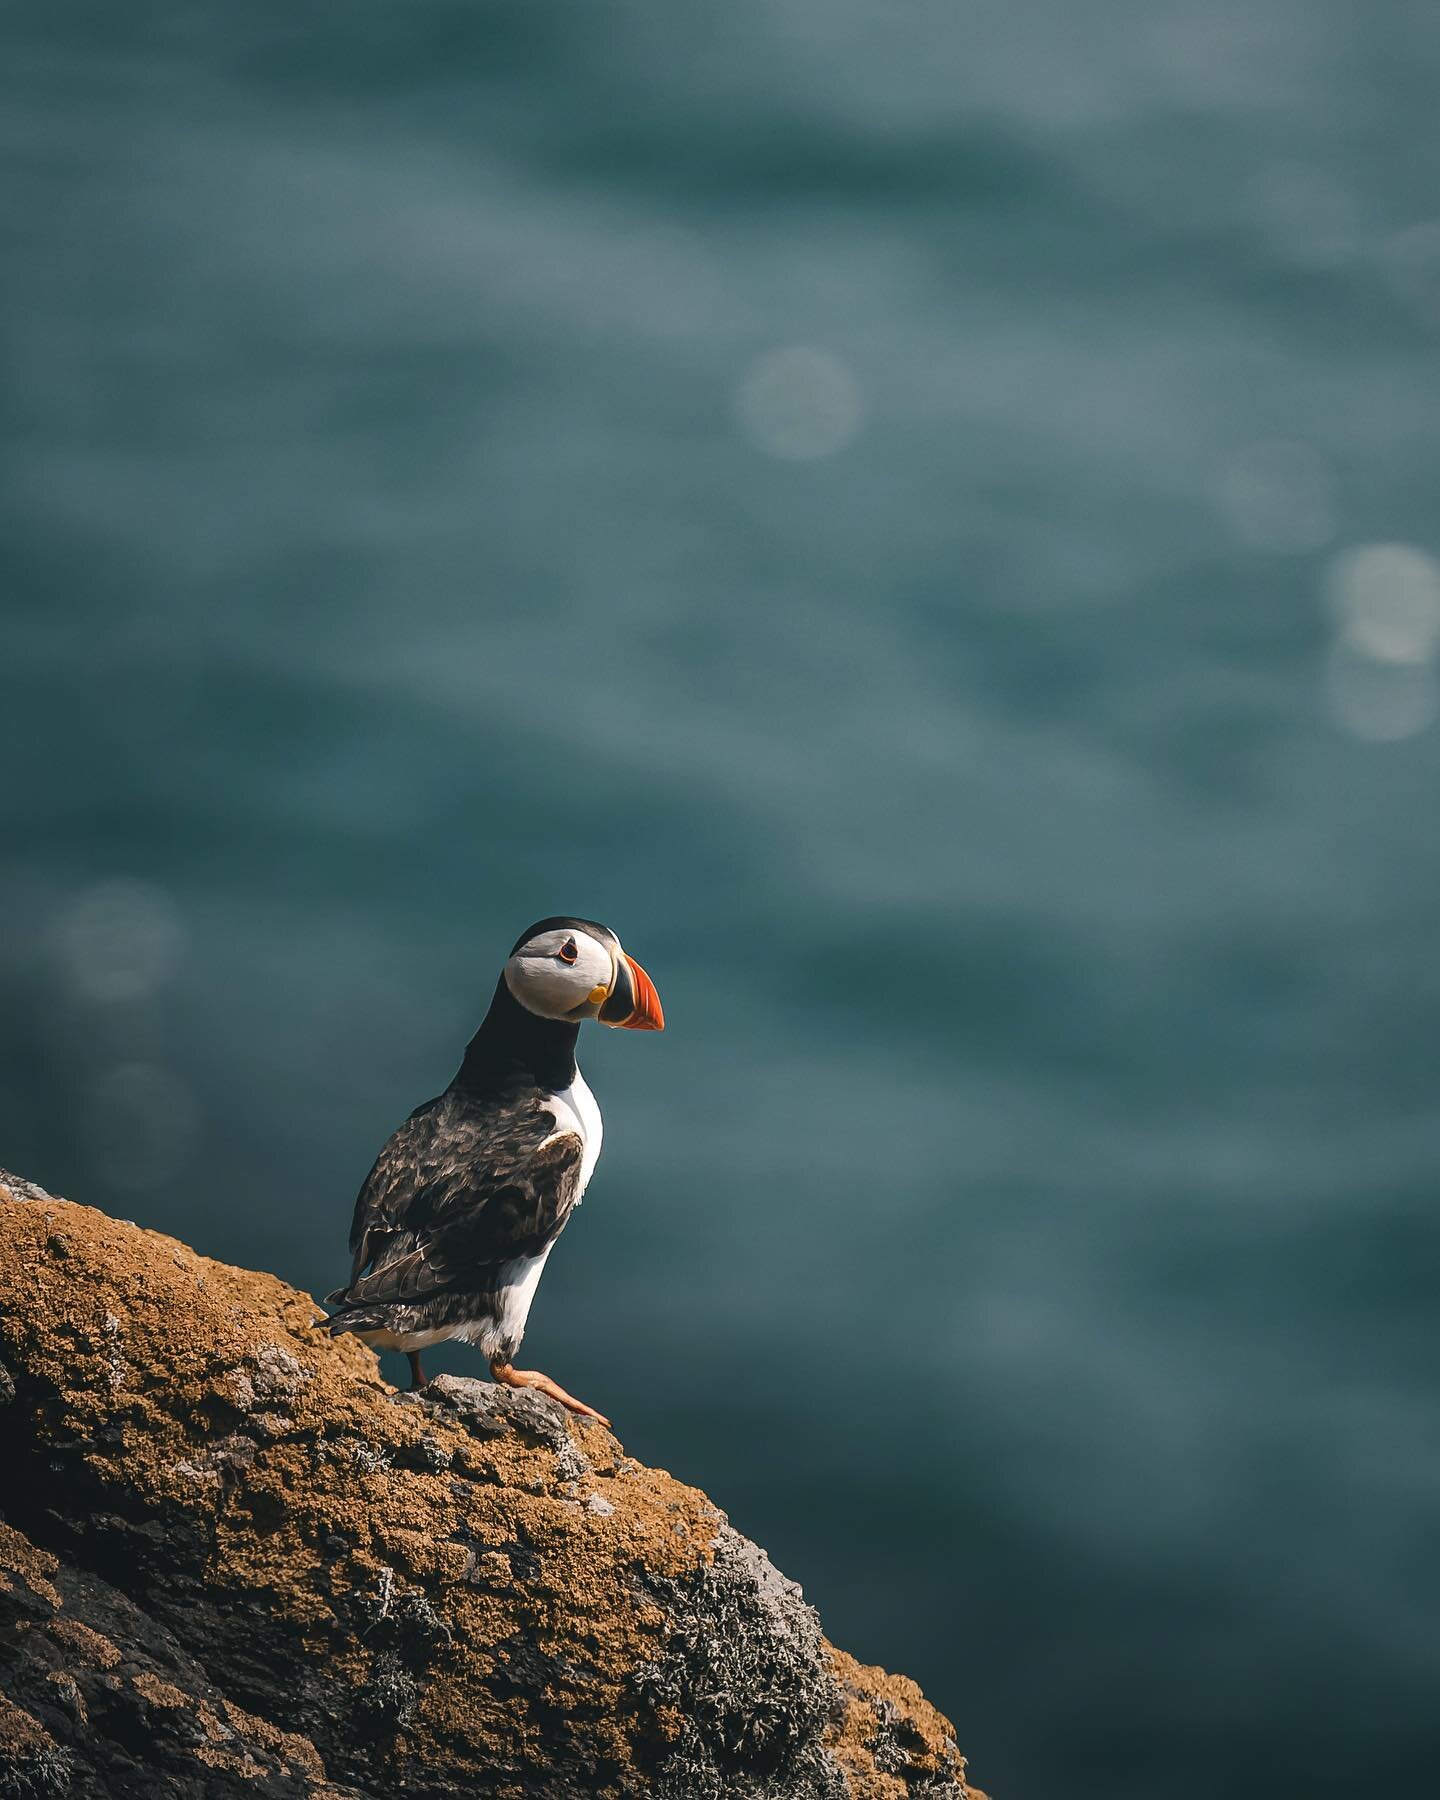 I think puffins suddenly become my most photographed subject this year. Skomer really is one of the best wildlife locations in the world! I&rsquo;ll be back there next month for a few days too, sadly no puffins will be left when I&rsquo;m there but s